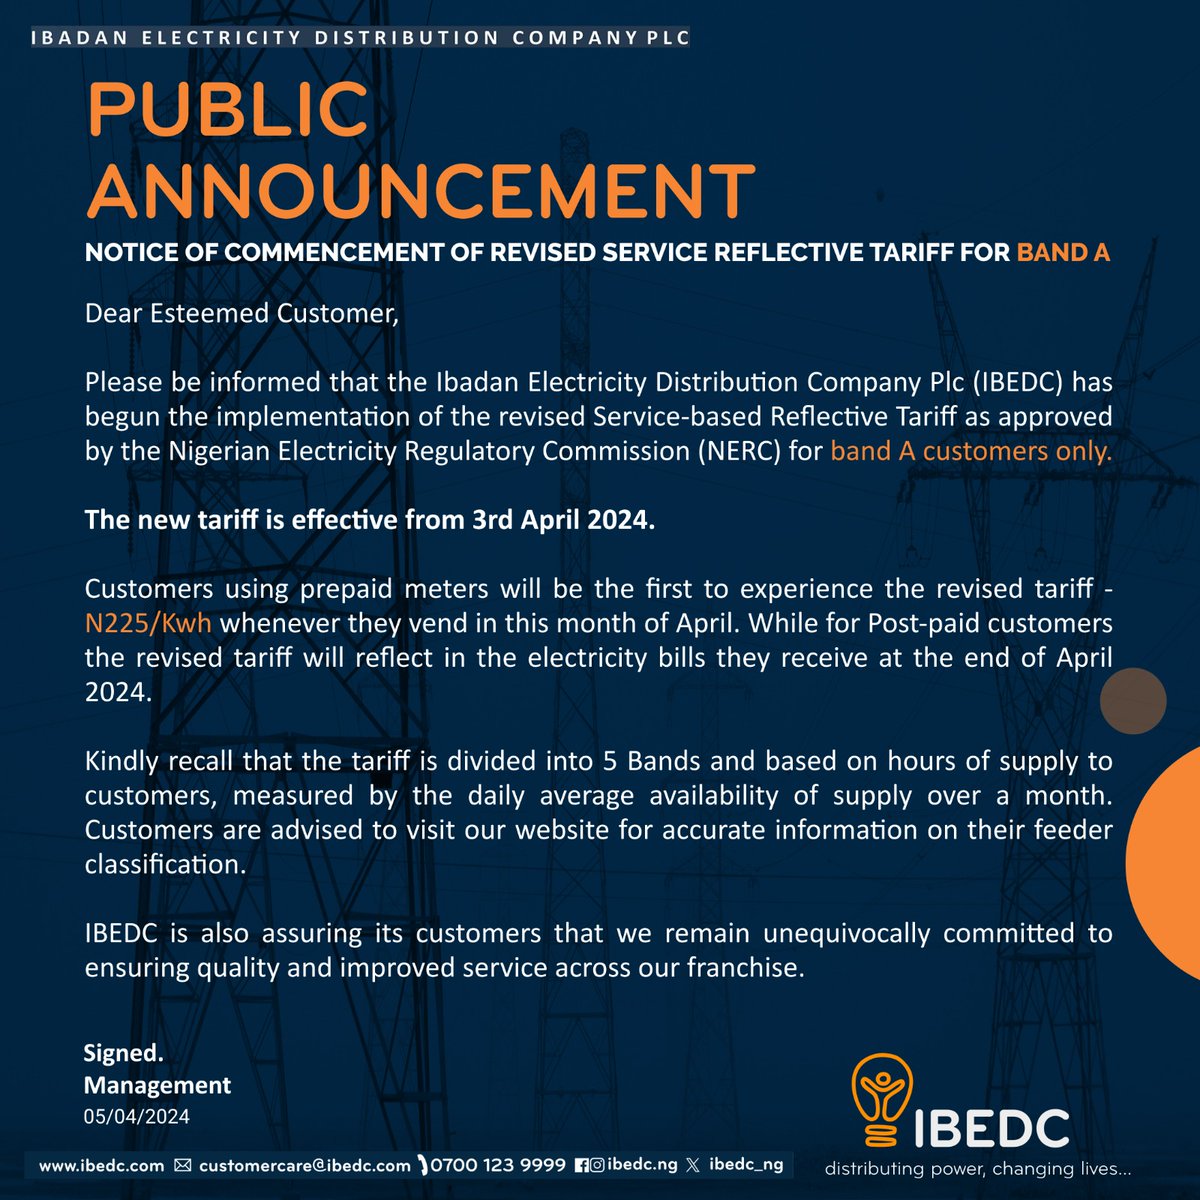 Public Announcement: Commencement of Revised Service Reflective Tariff for Band A #ibedc #distributingpower #changinglives